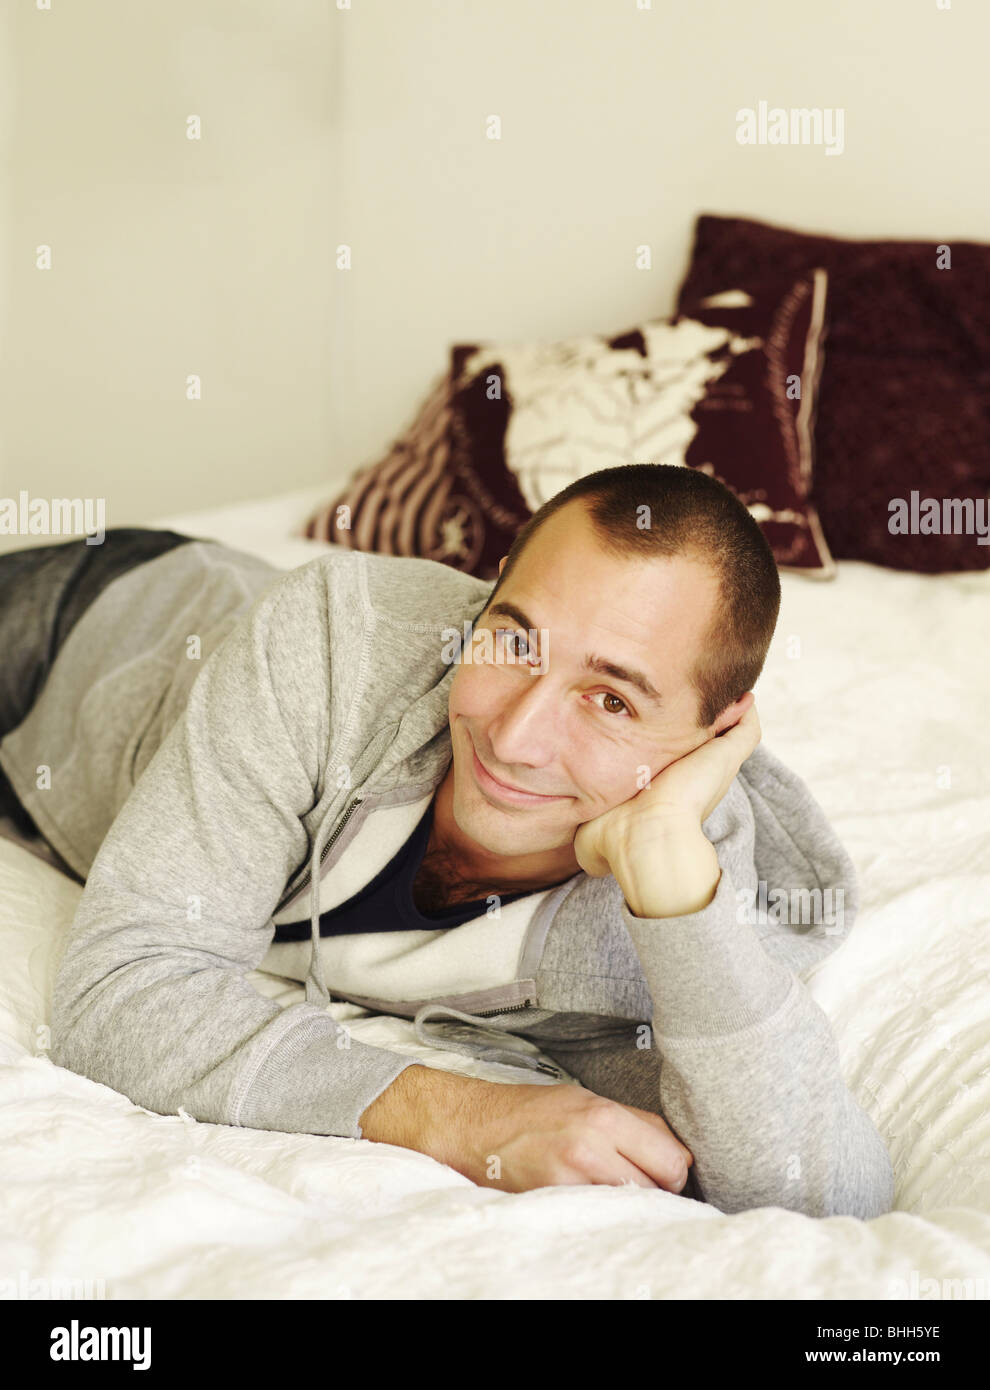 Portrait of a mid-adult man in a bed, Sweden. Stock Photo